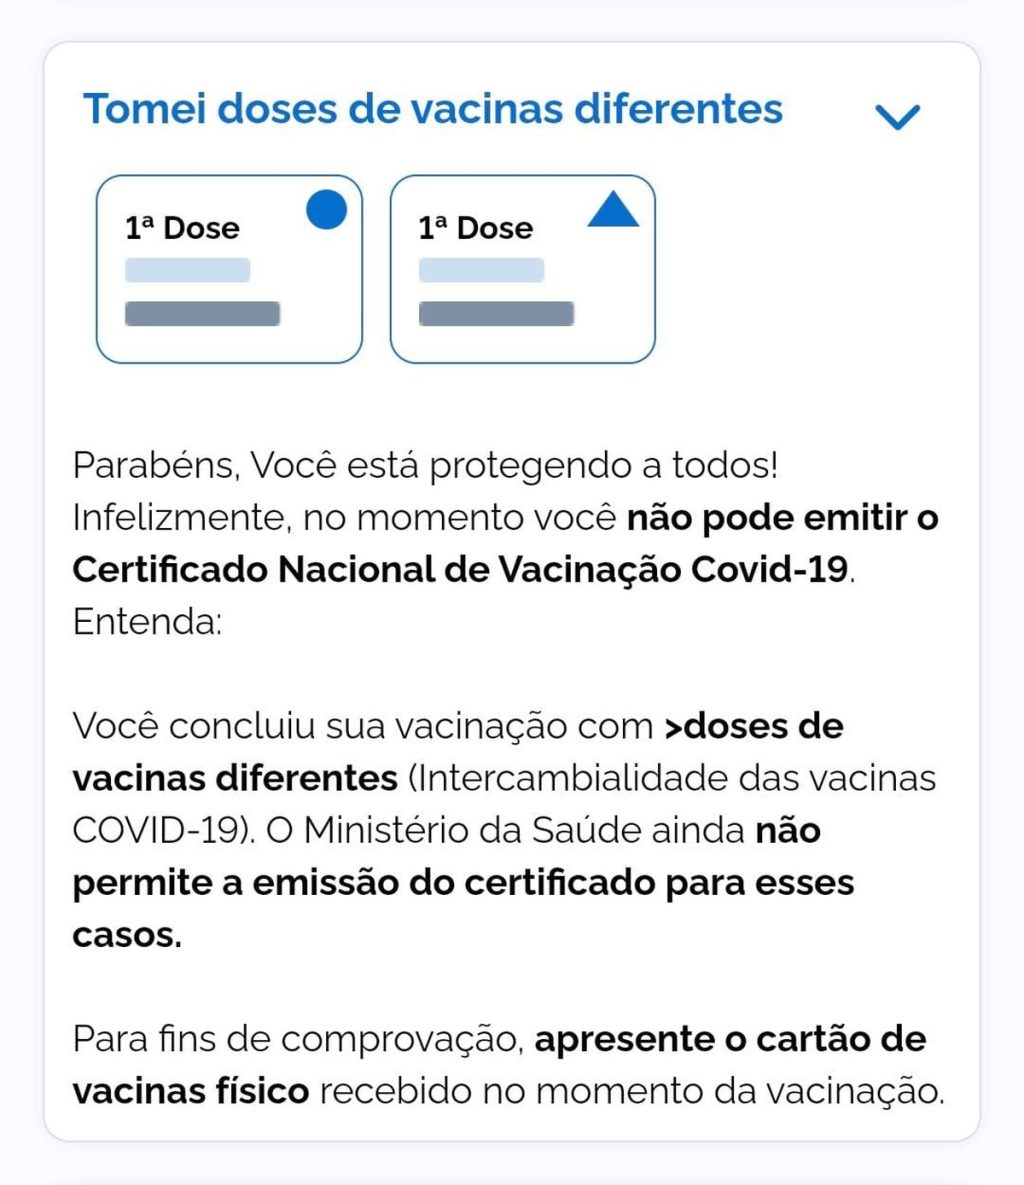 Connect SUS now warns that a vaccination certificate will not be issued to those who have taken the vaccine mixture |  the health